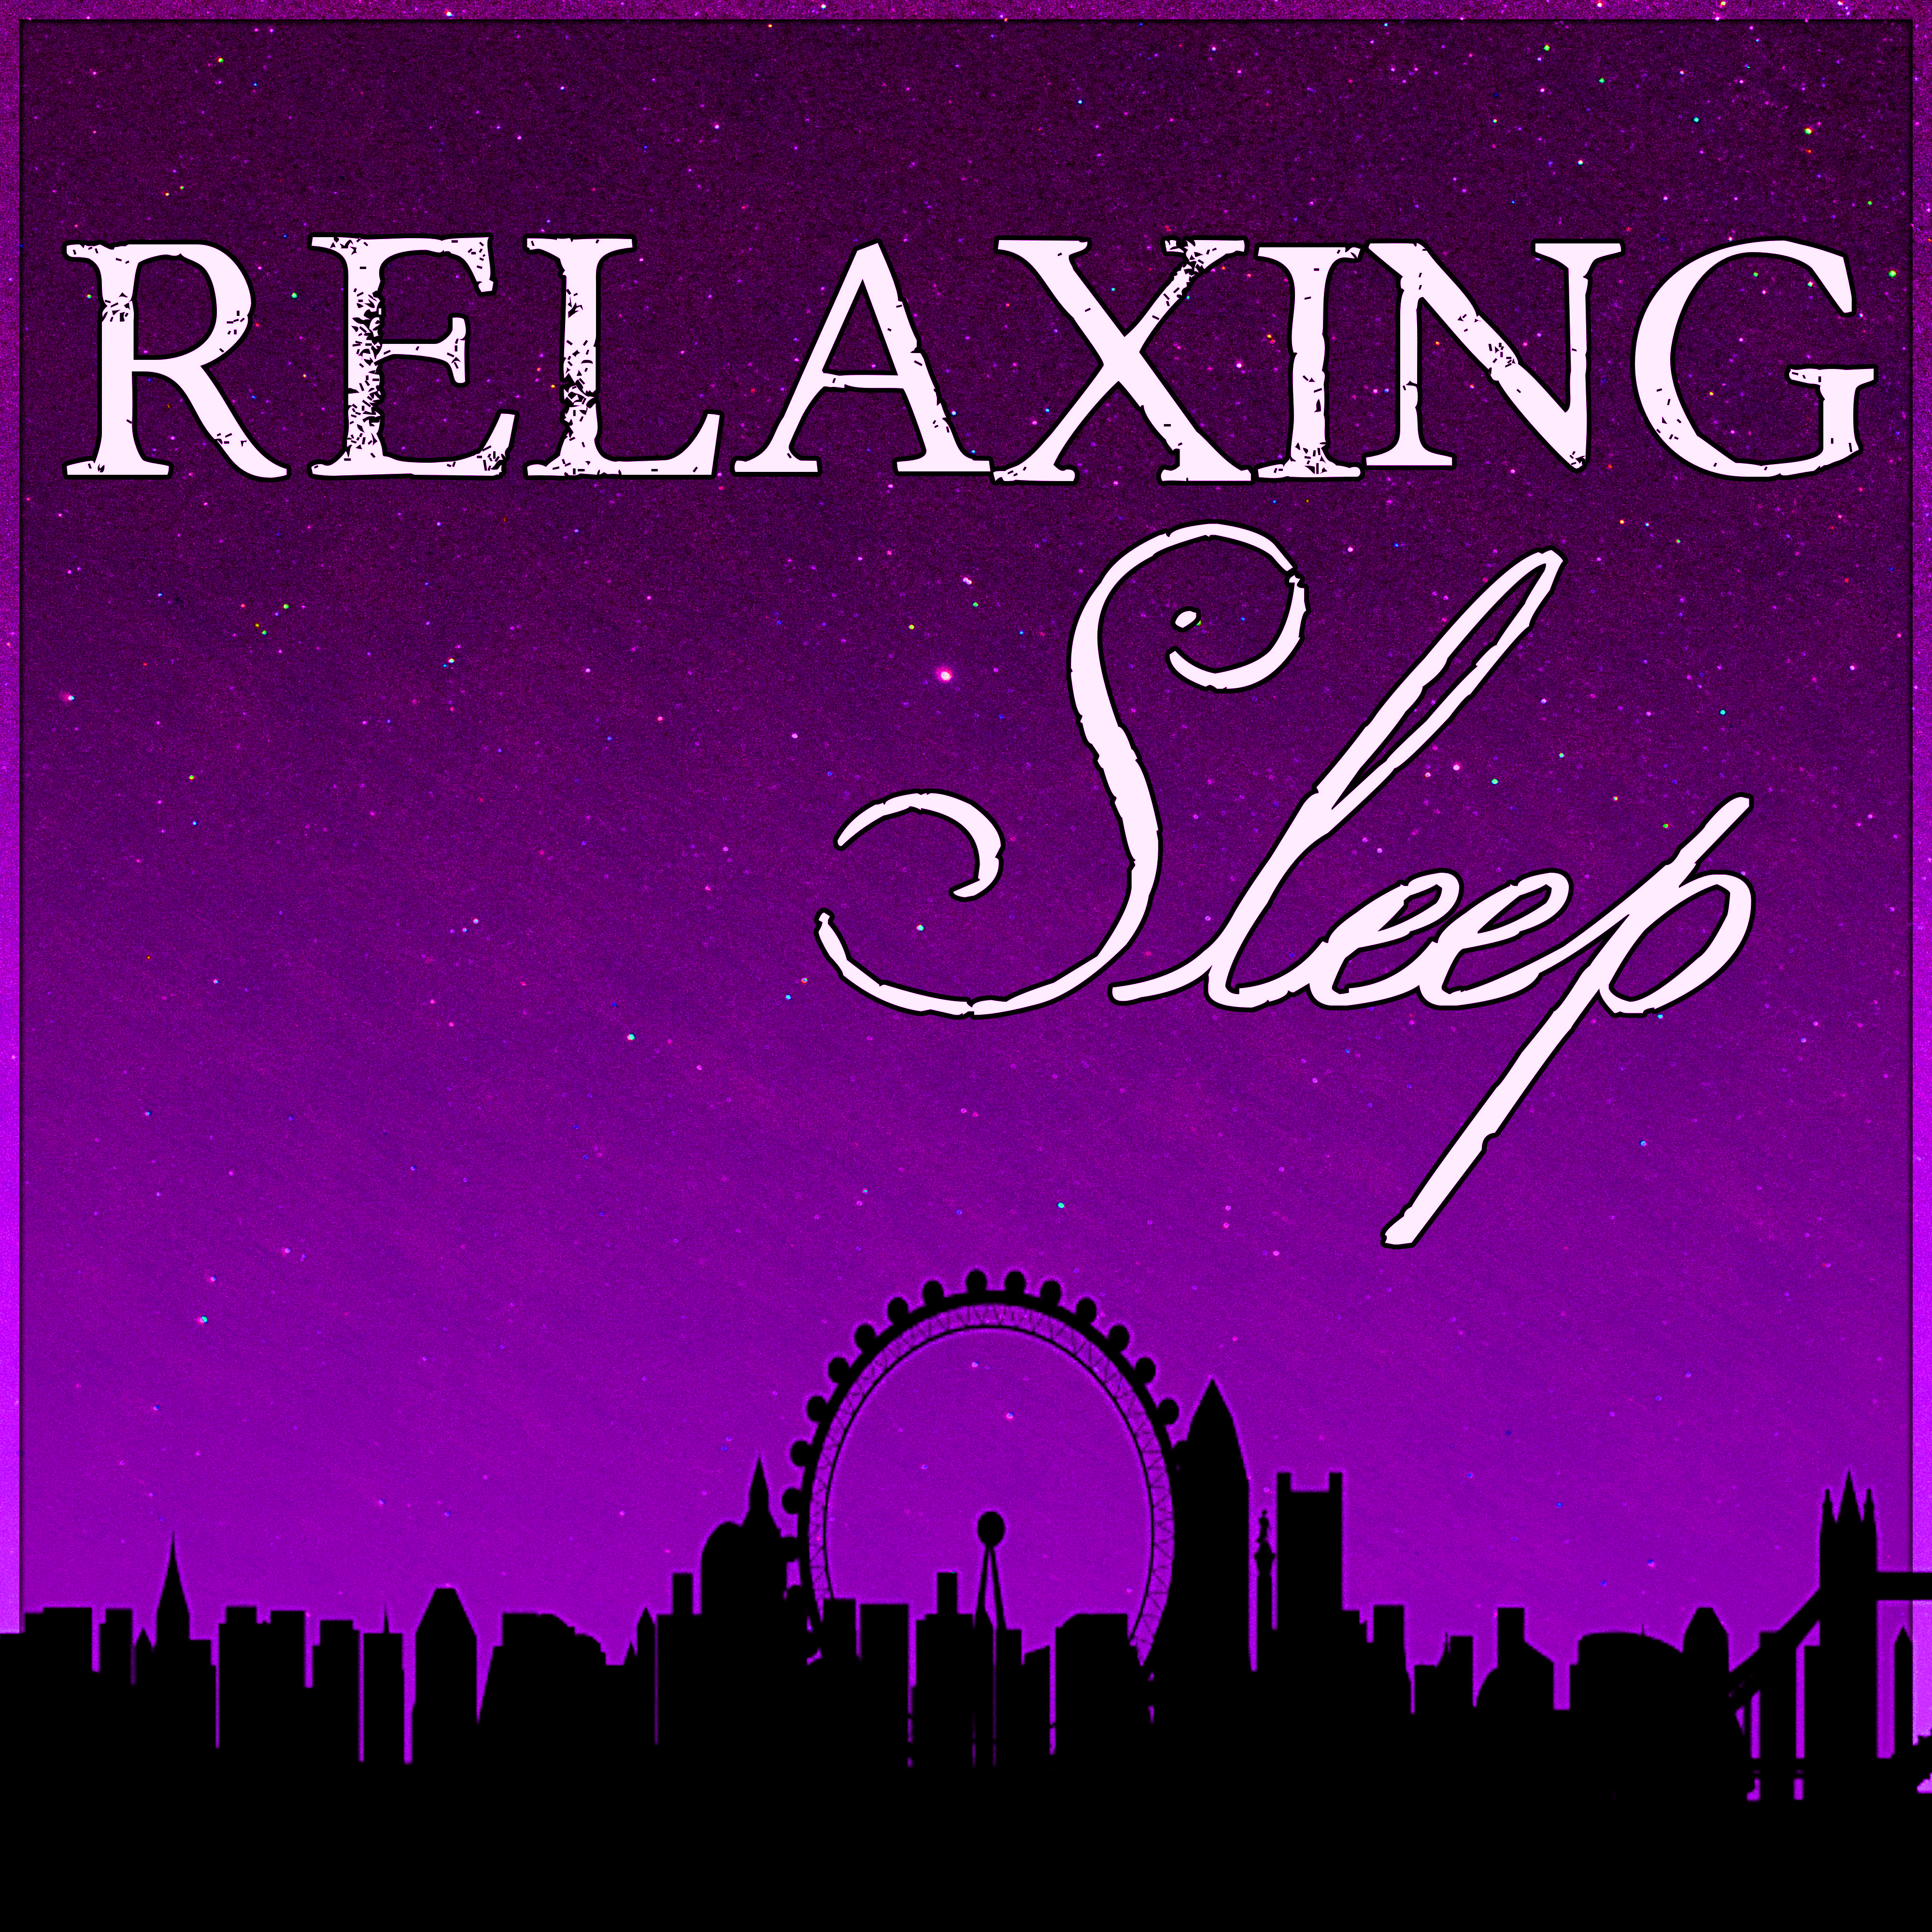 Relaxing Sleep - Music for Stress Relief and Trouble Sleeping, Therapy Music with Nature Sounds, Background Music, Gentle Dreams